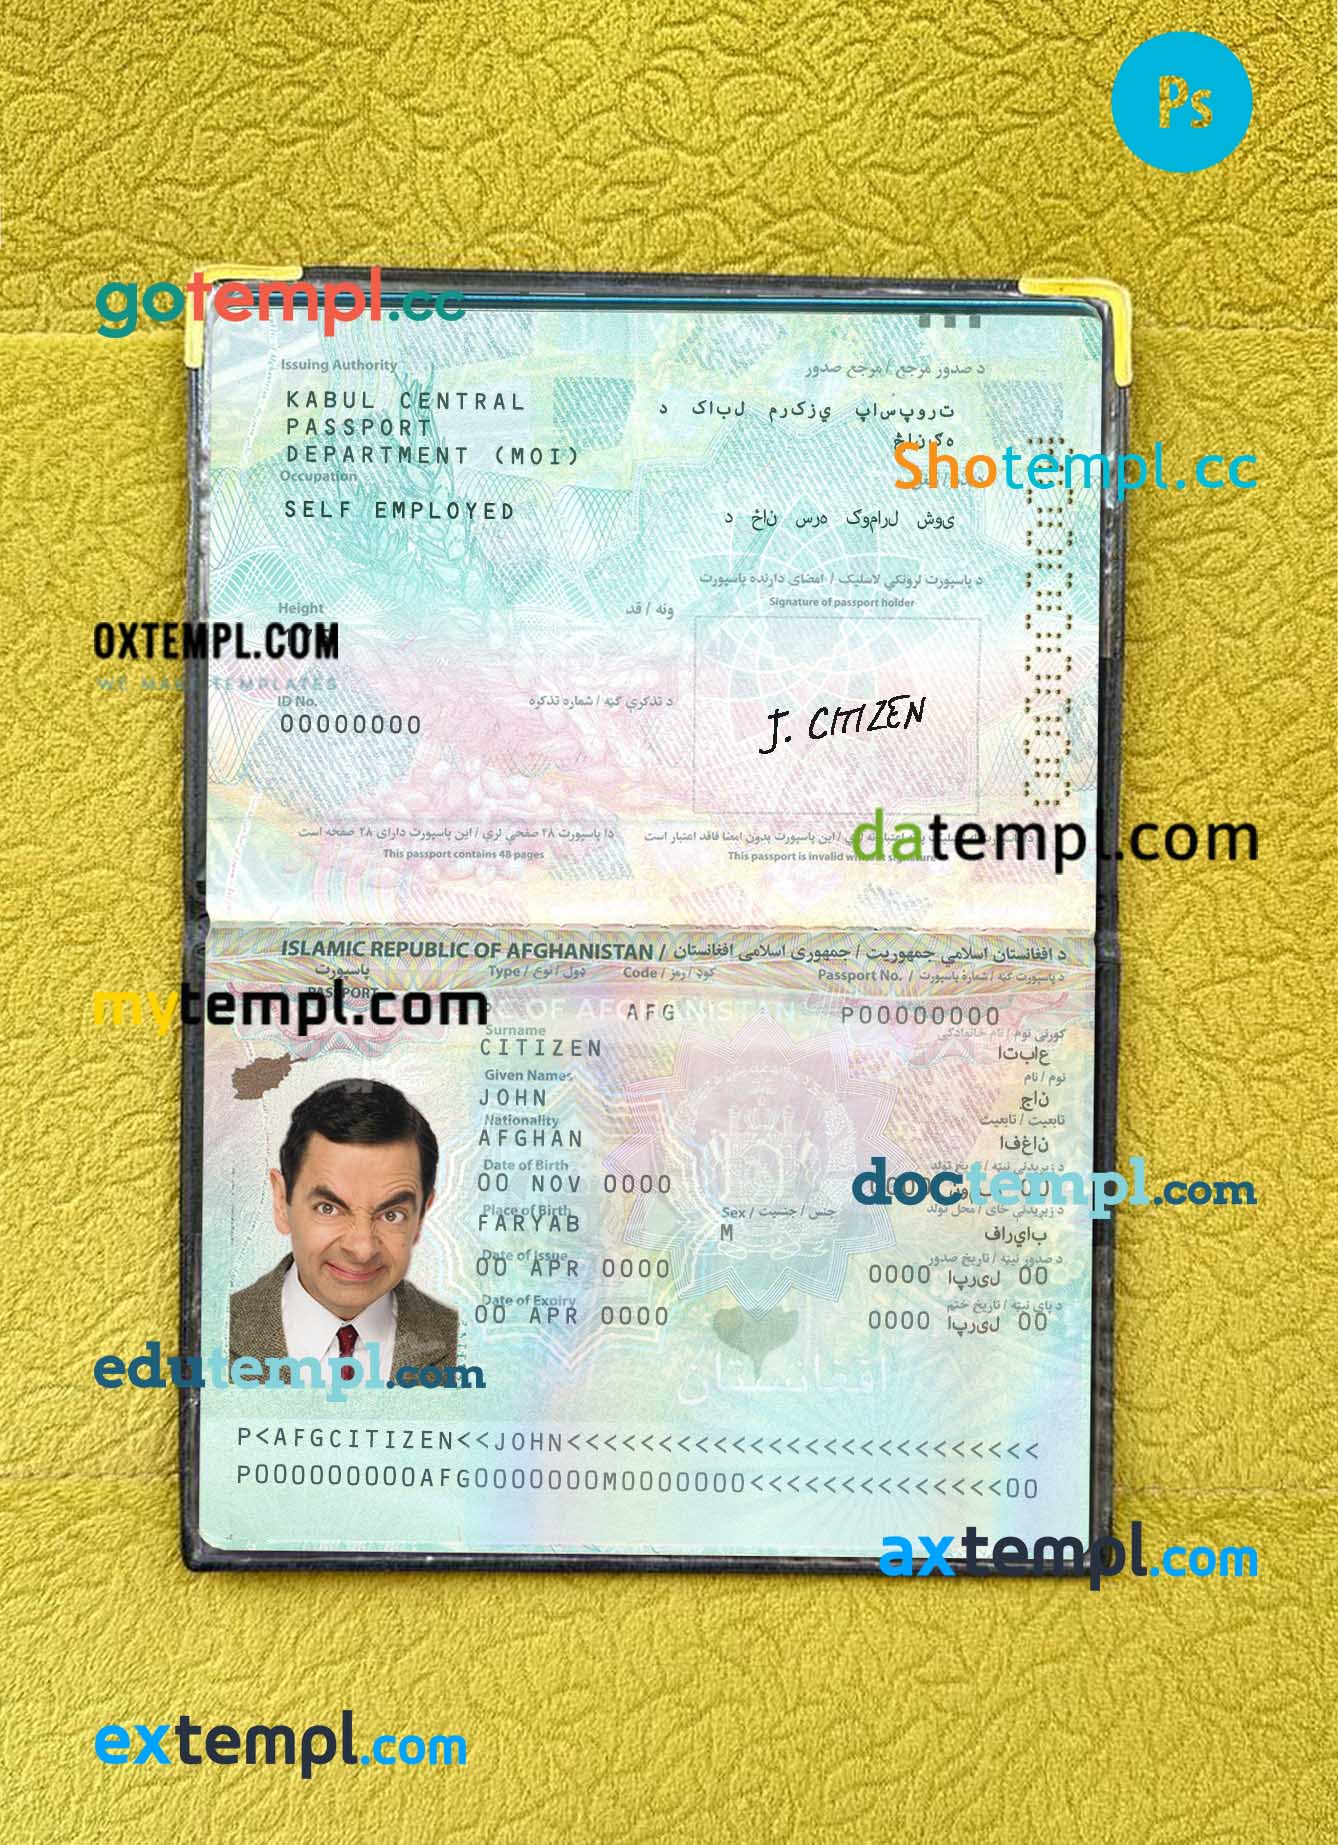 Afghanistan passport editable PSD files, scan and photo-realistic look, 2 in 1